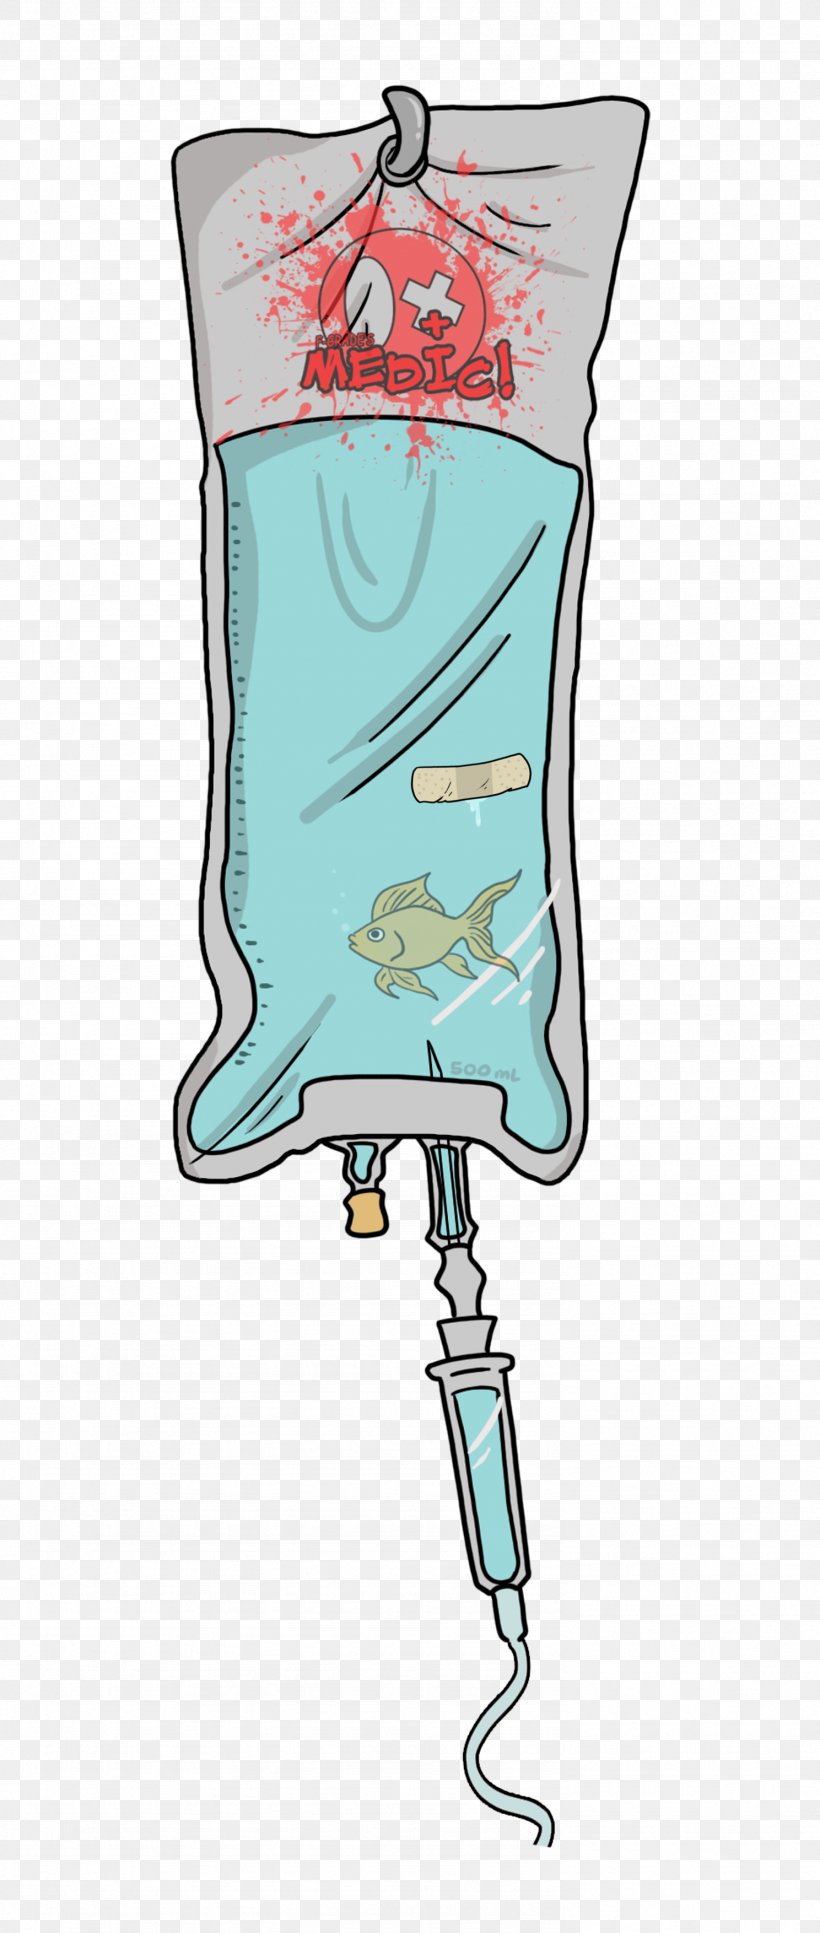 Intravenous Therapy Cartoon Infusion Pump Pharmaceutical Drug, PNG, 1488x3508px, Intravenous Therapy, Art, Blood, Cartoon, Fictional Character Download Free